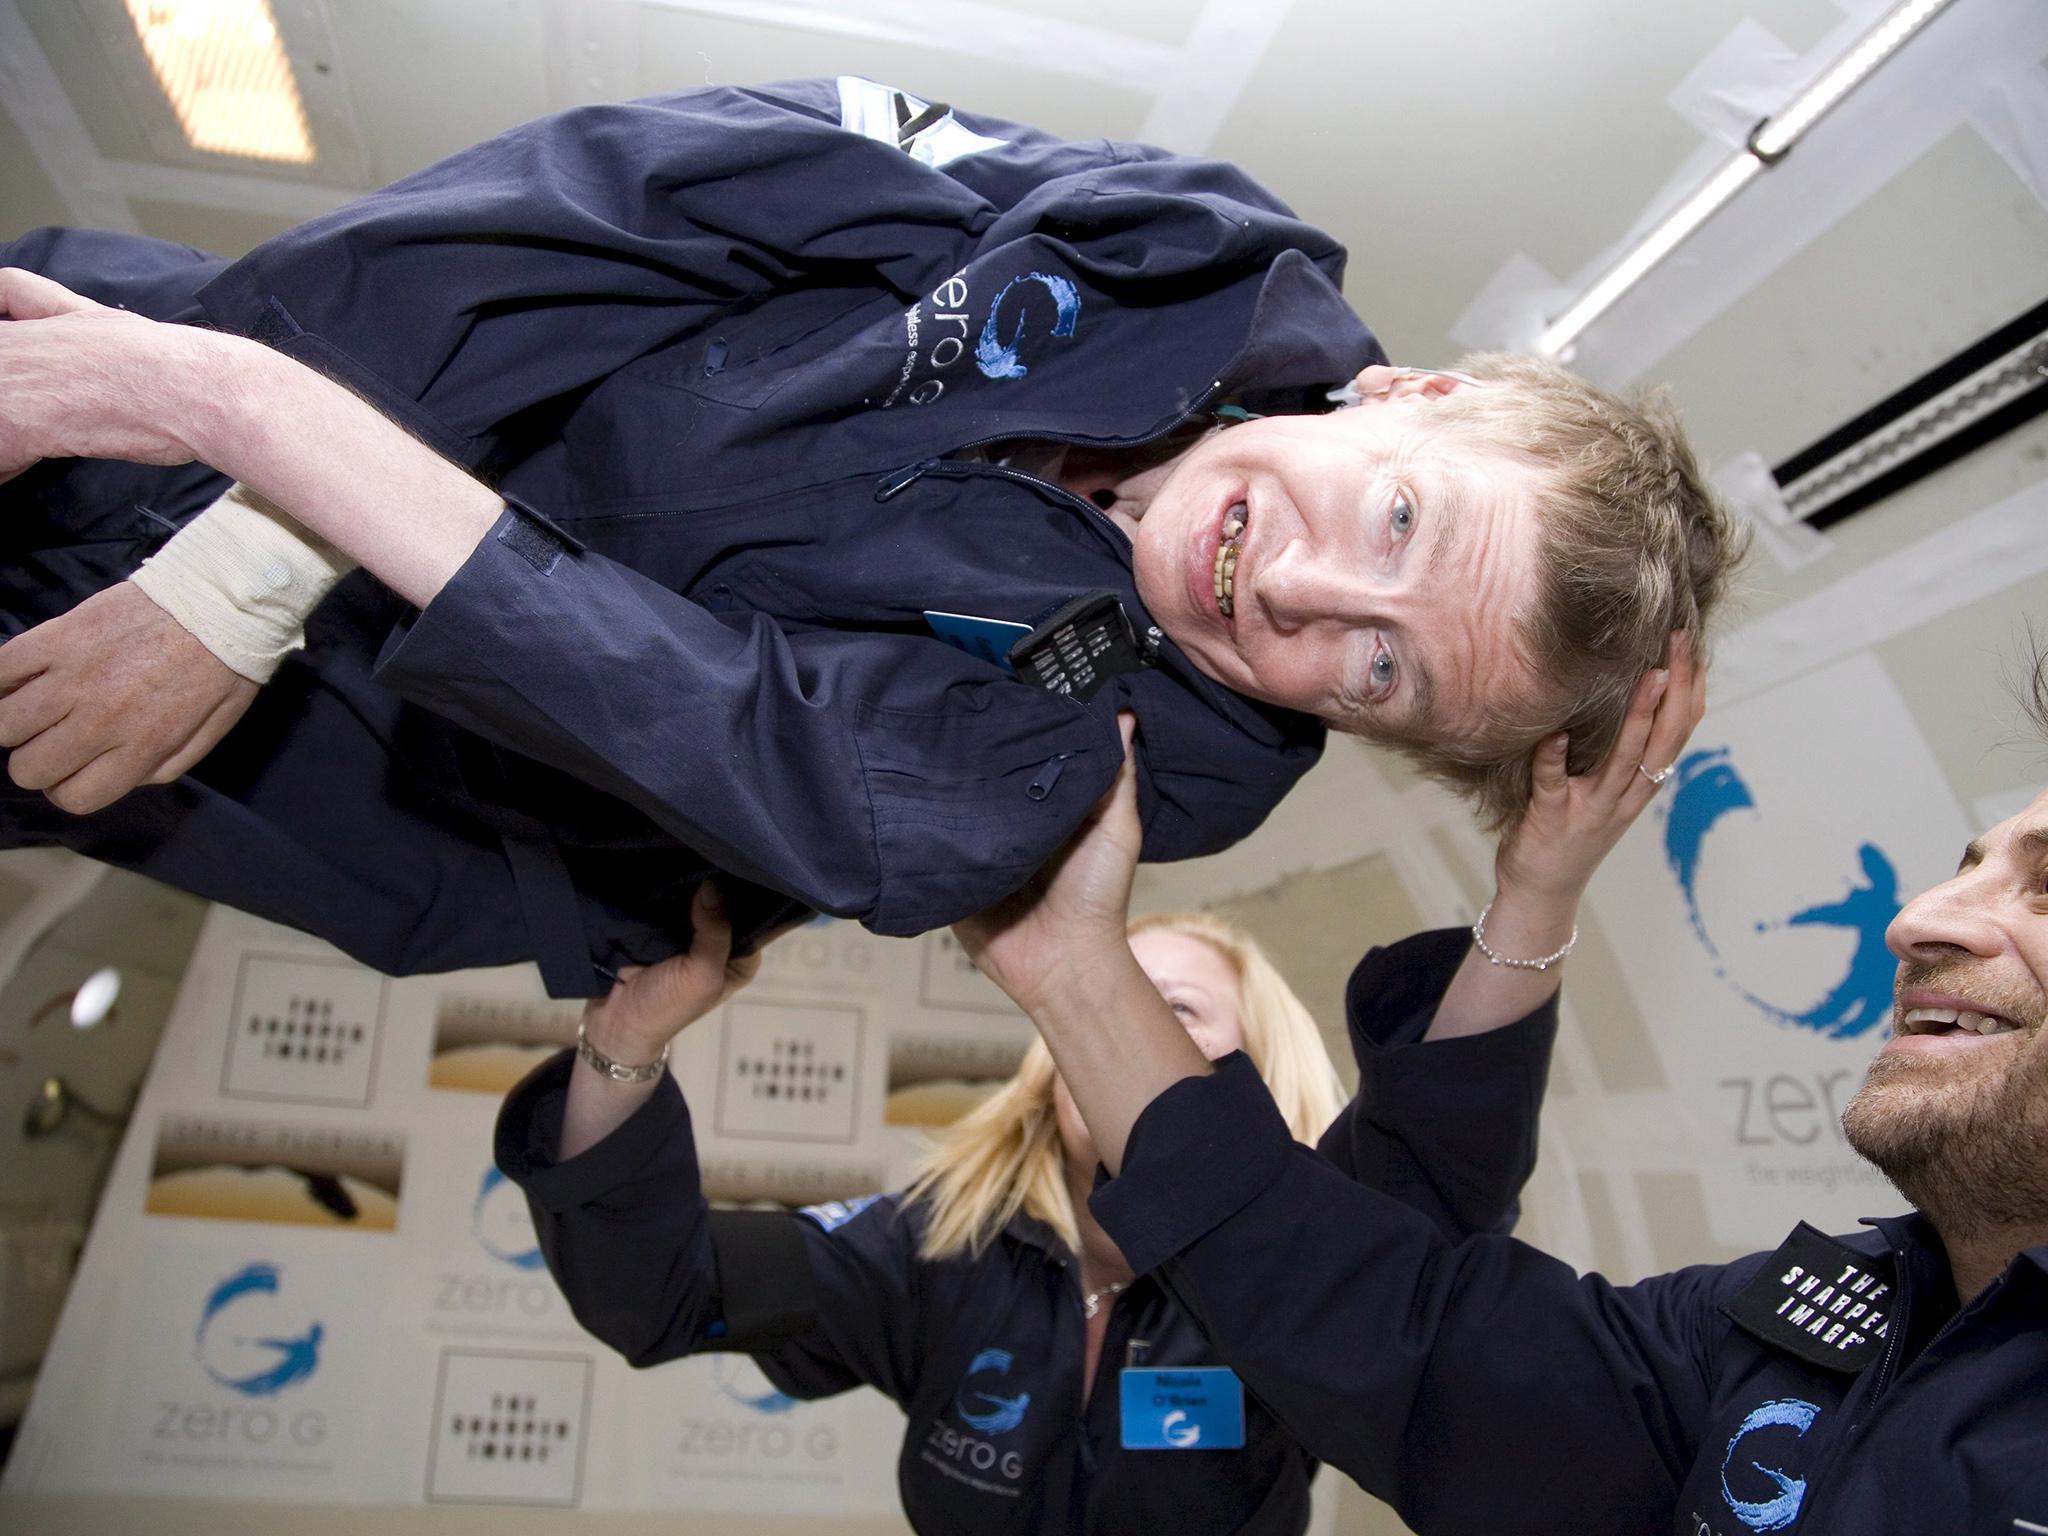 Stephen Hawking floating in a weightless environment on an aeroplane in 2007